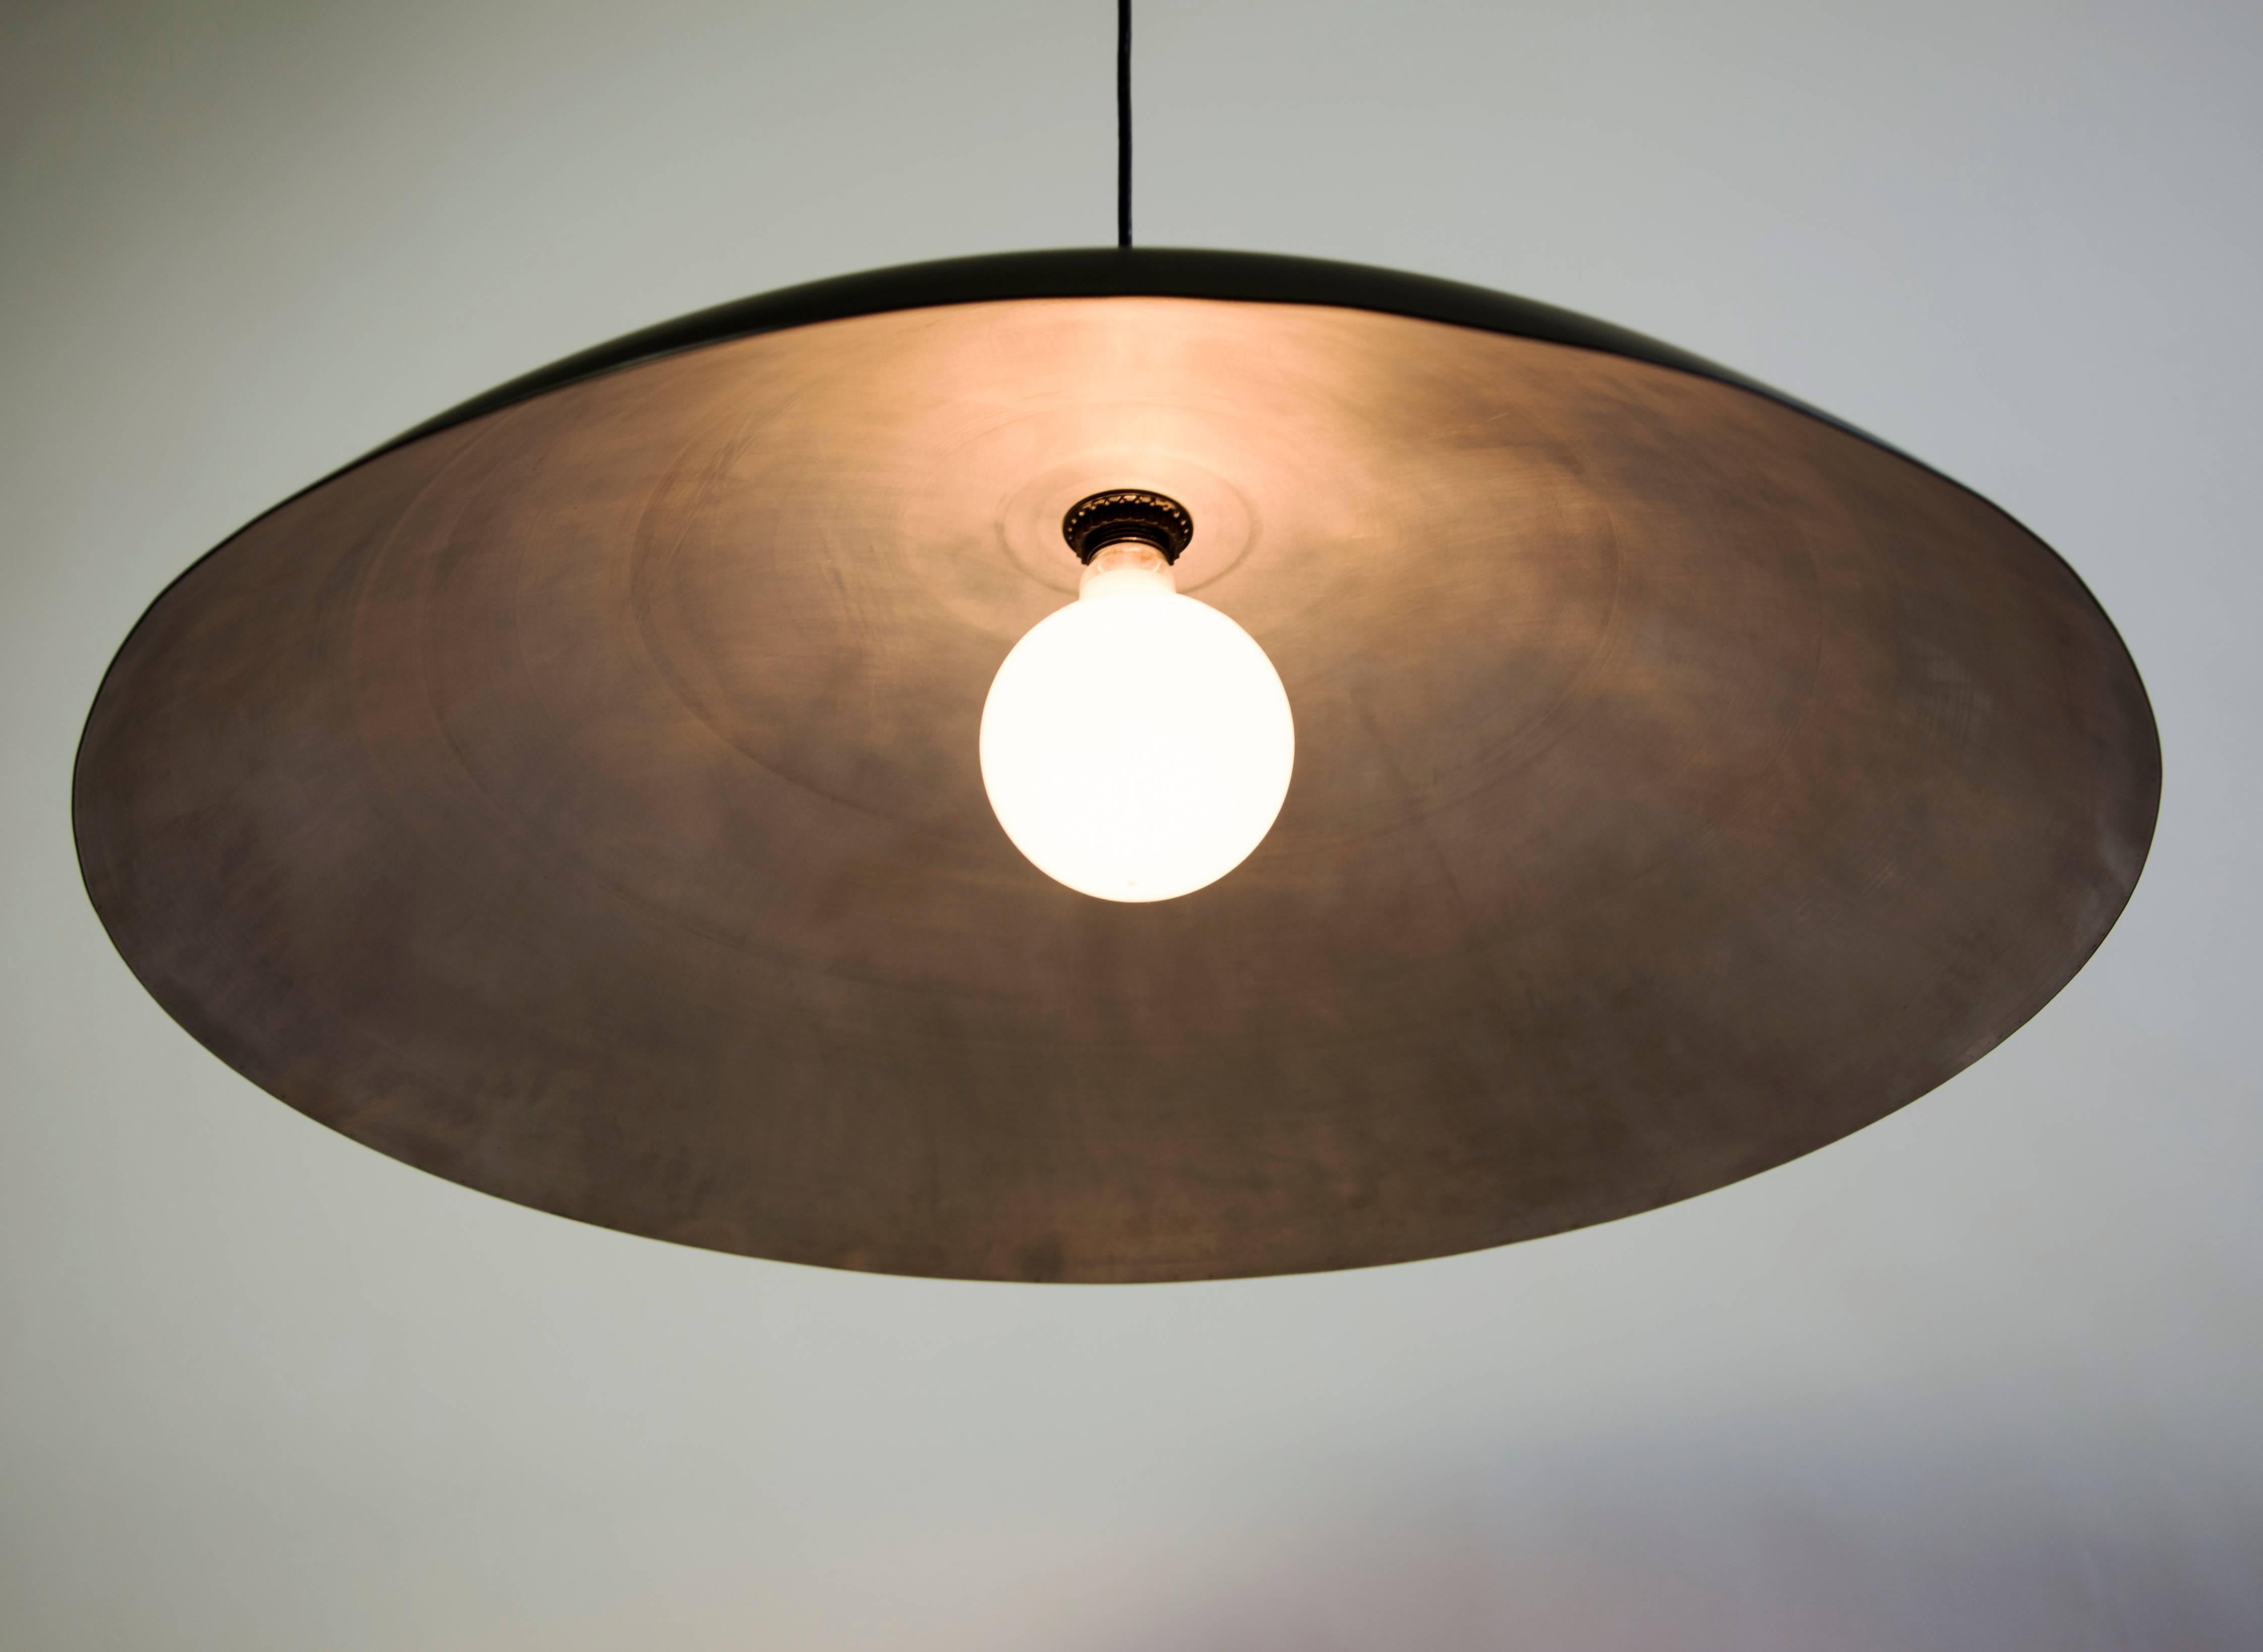 Spun Customizable Oversized Pendant by Research Lighting, Cadet Blue & Silver, MTO For Sale